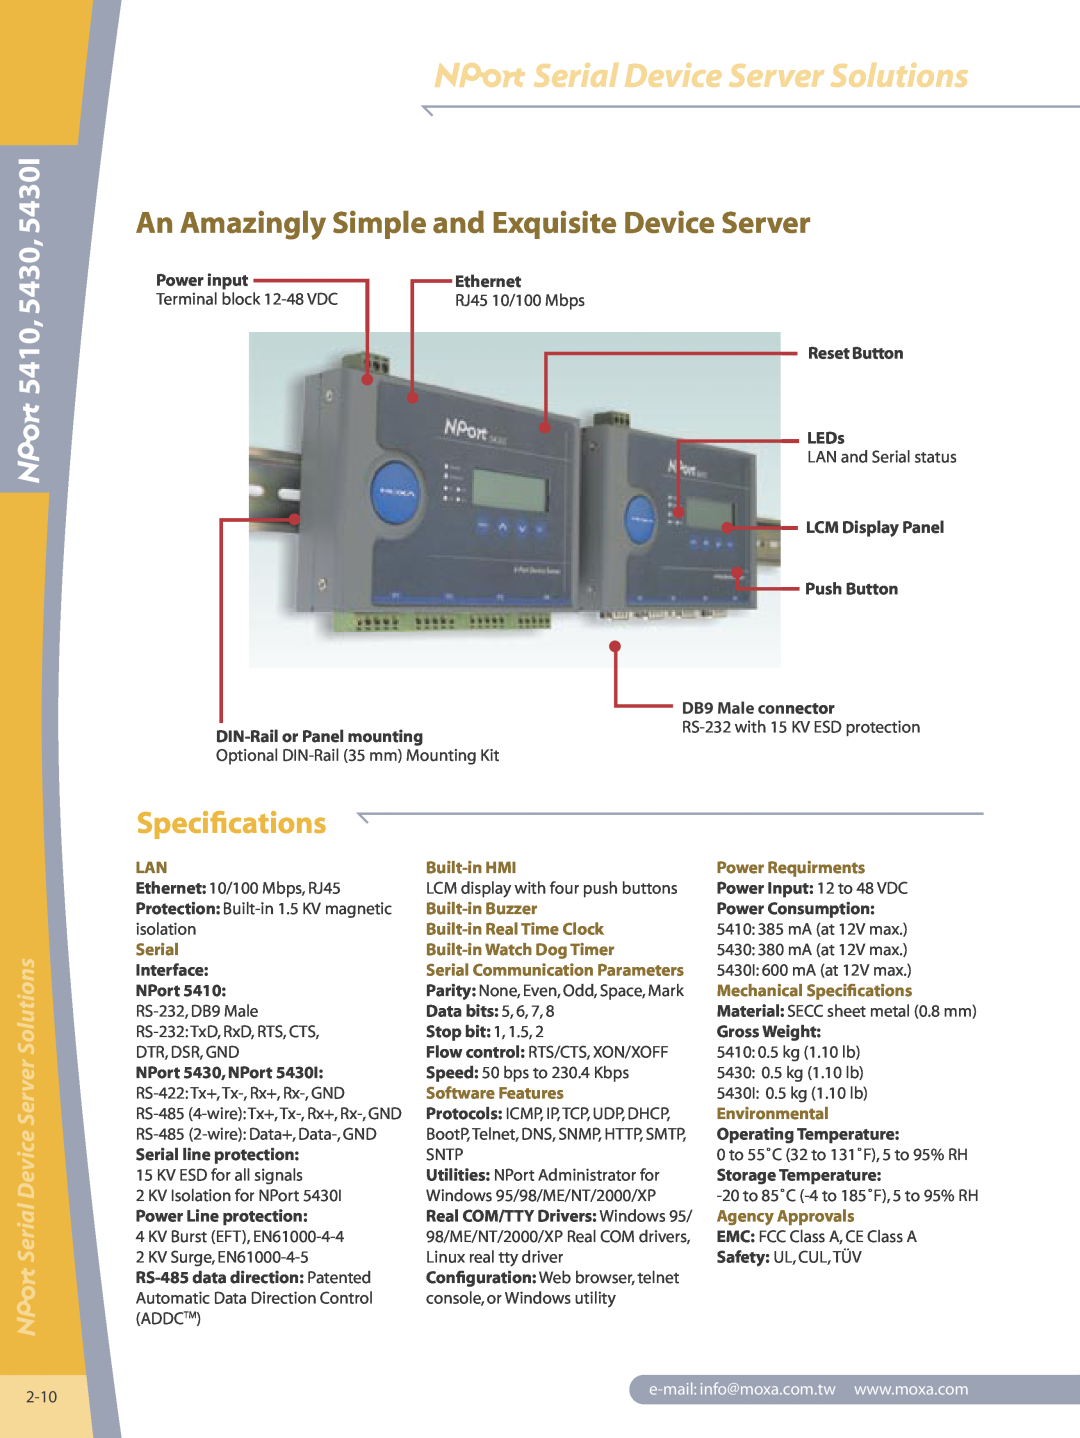 Moxa Technologies 5430I manual An Amazingly Simple and Exquisite Device Server, 5410, Specifications 